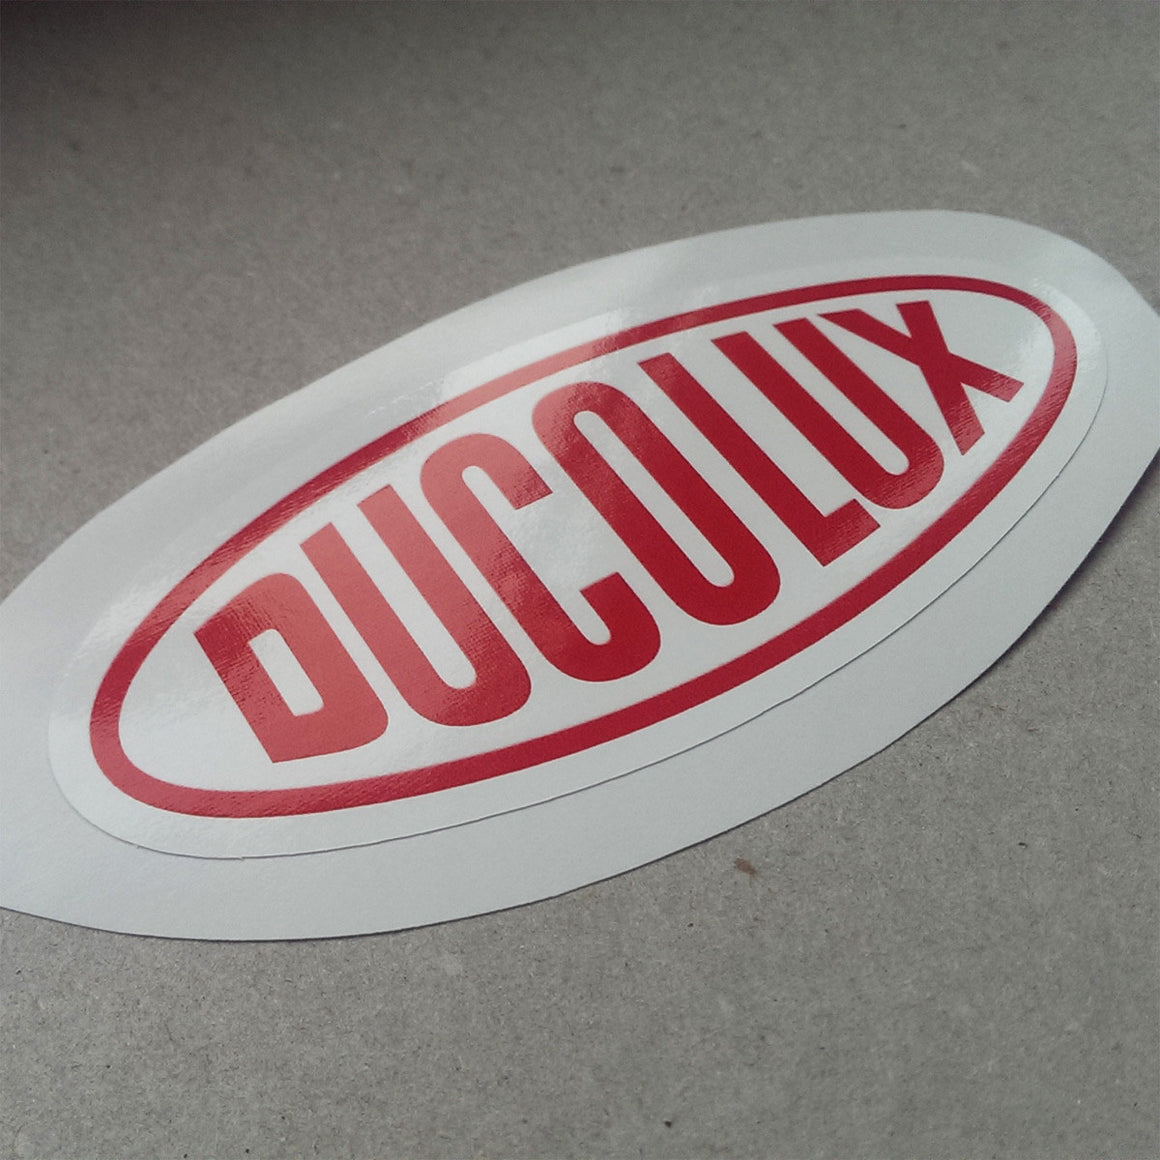 (New) Vintage 'DUCOLUX' Decal